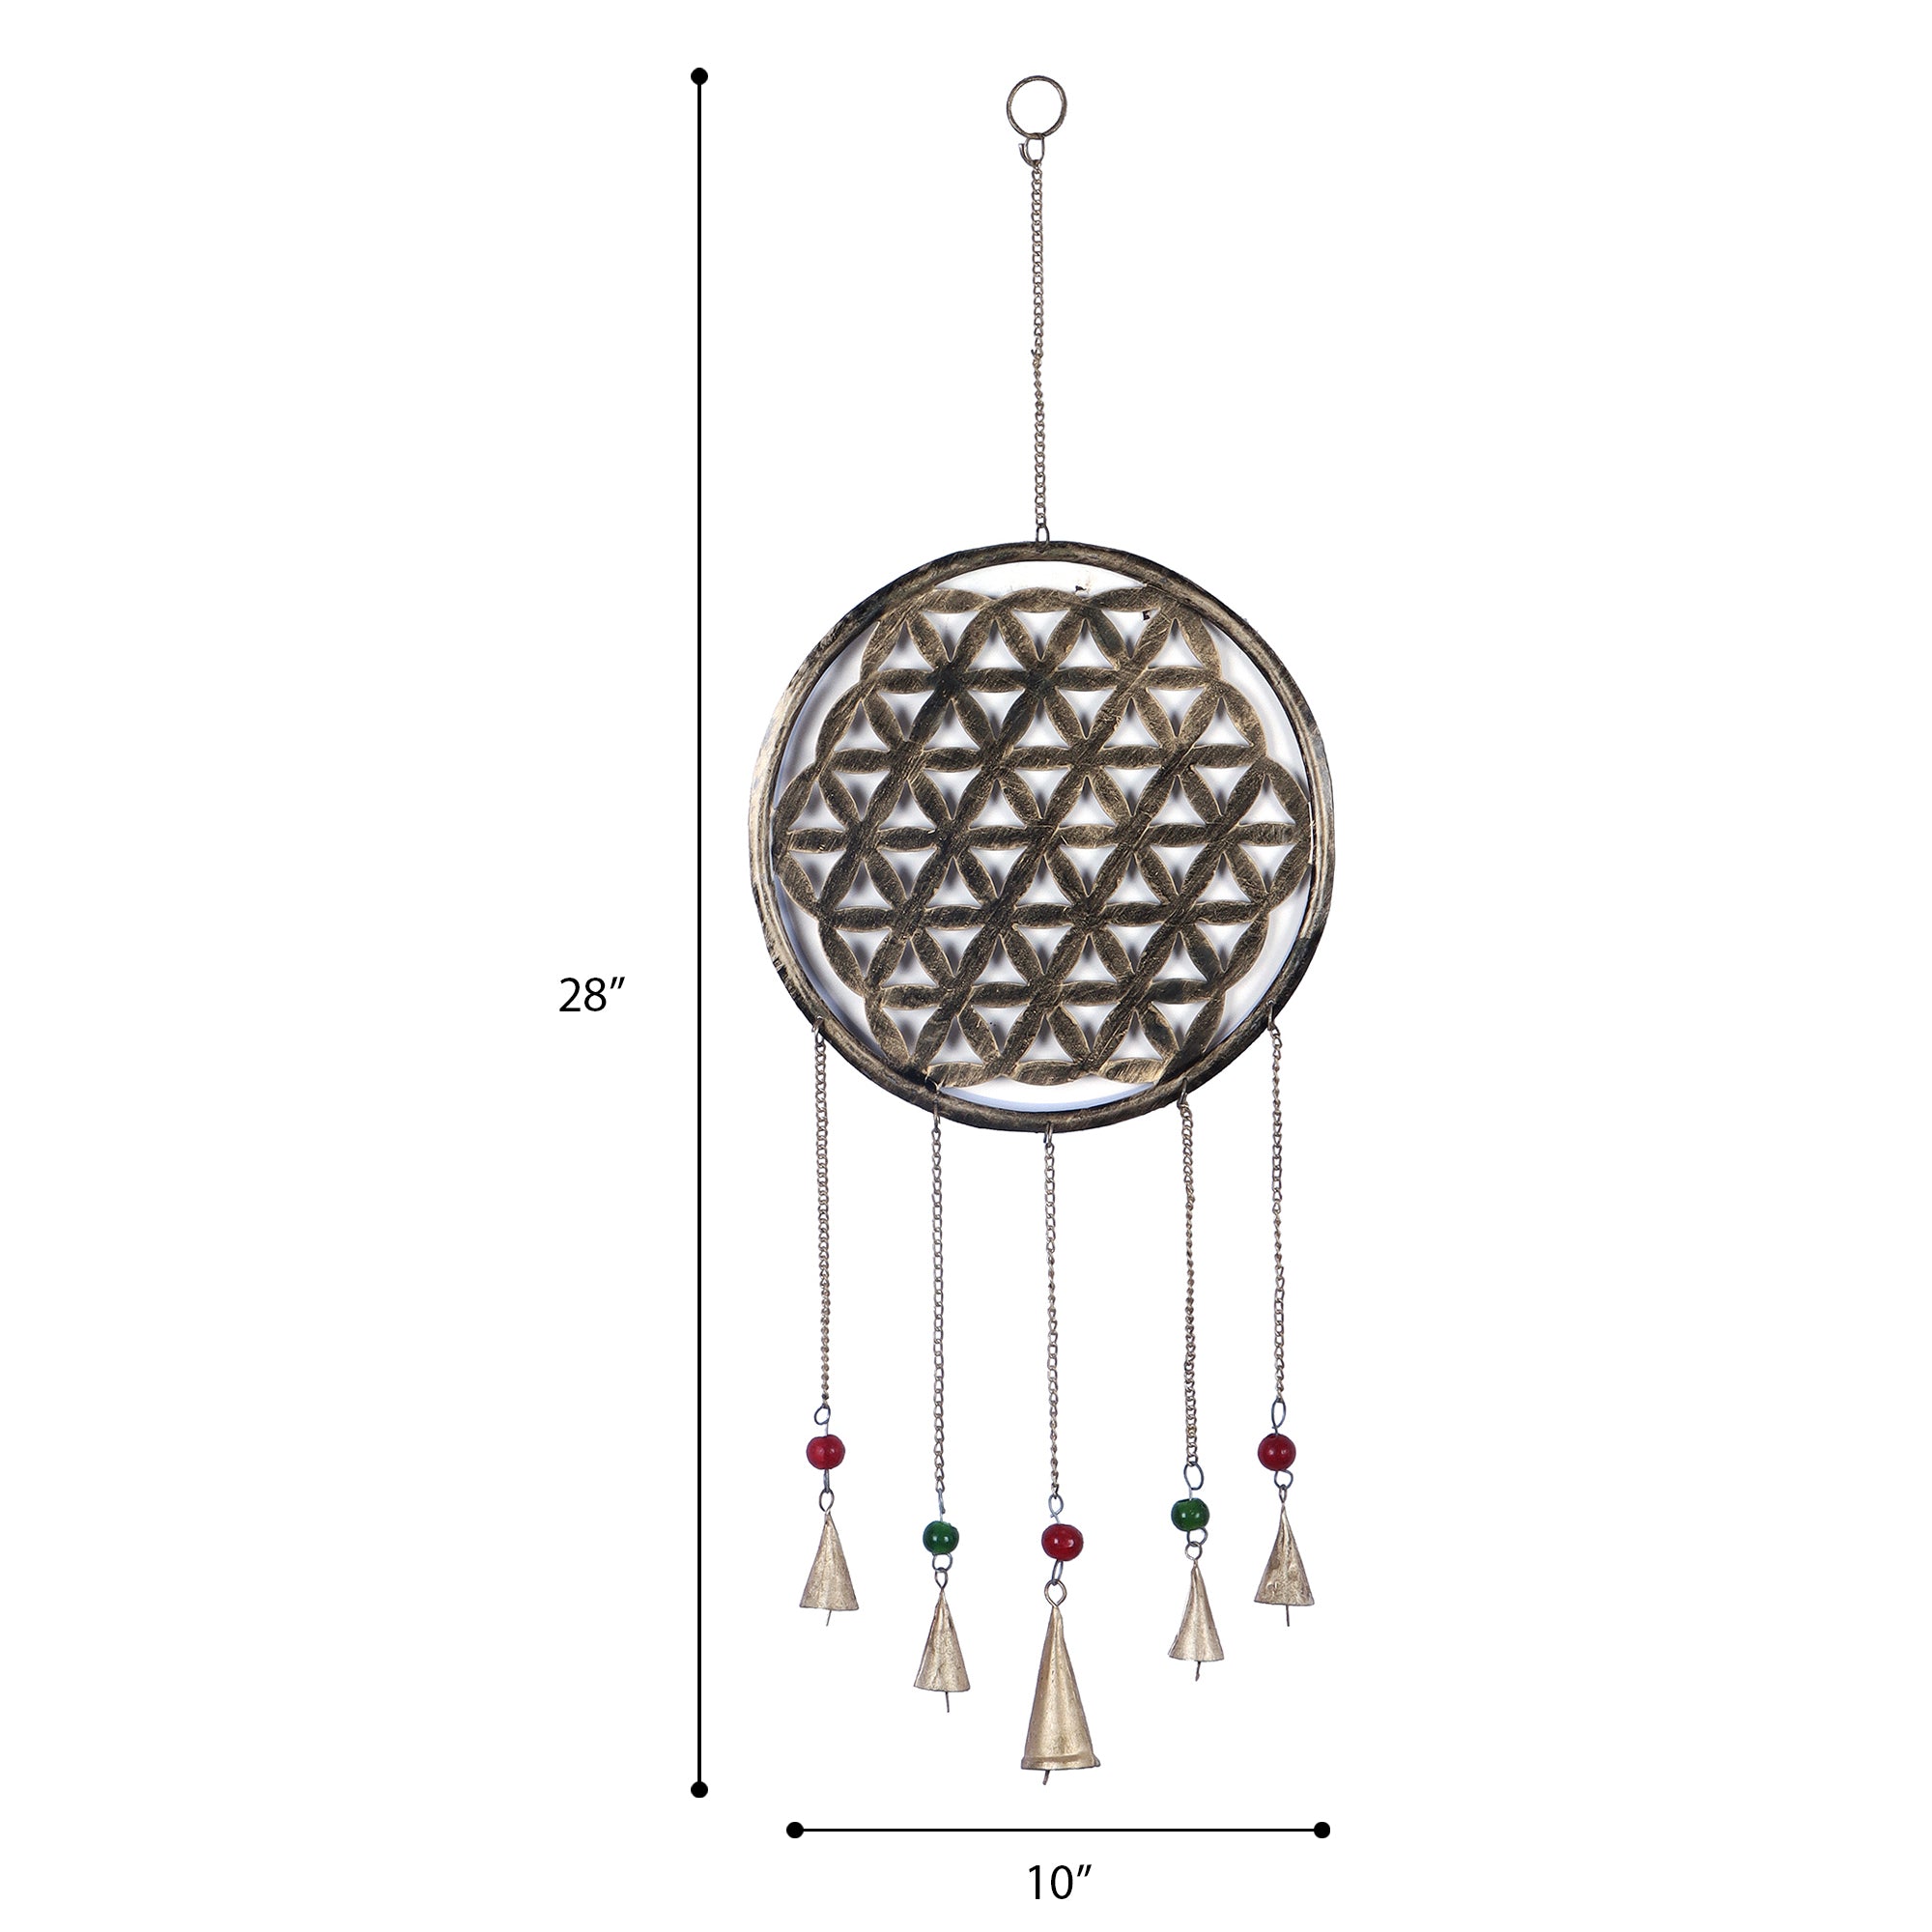 The Flower Bed Wind Chime